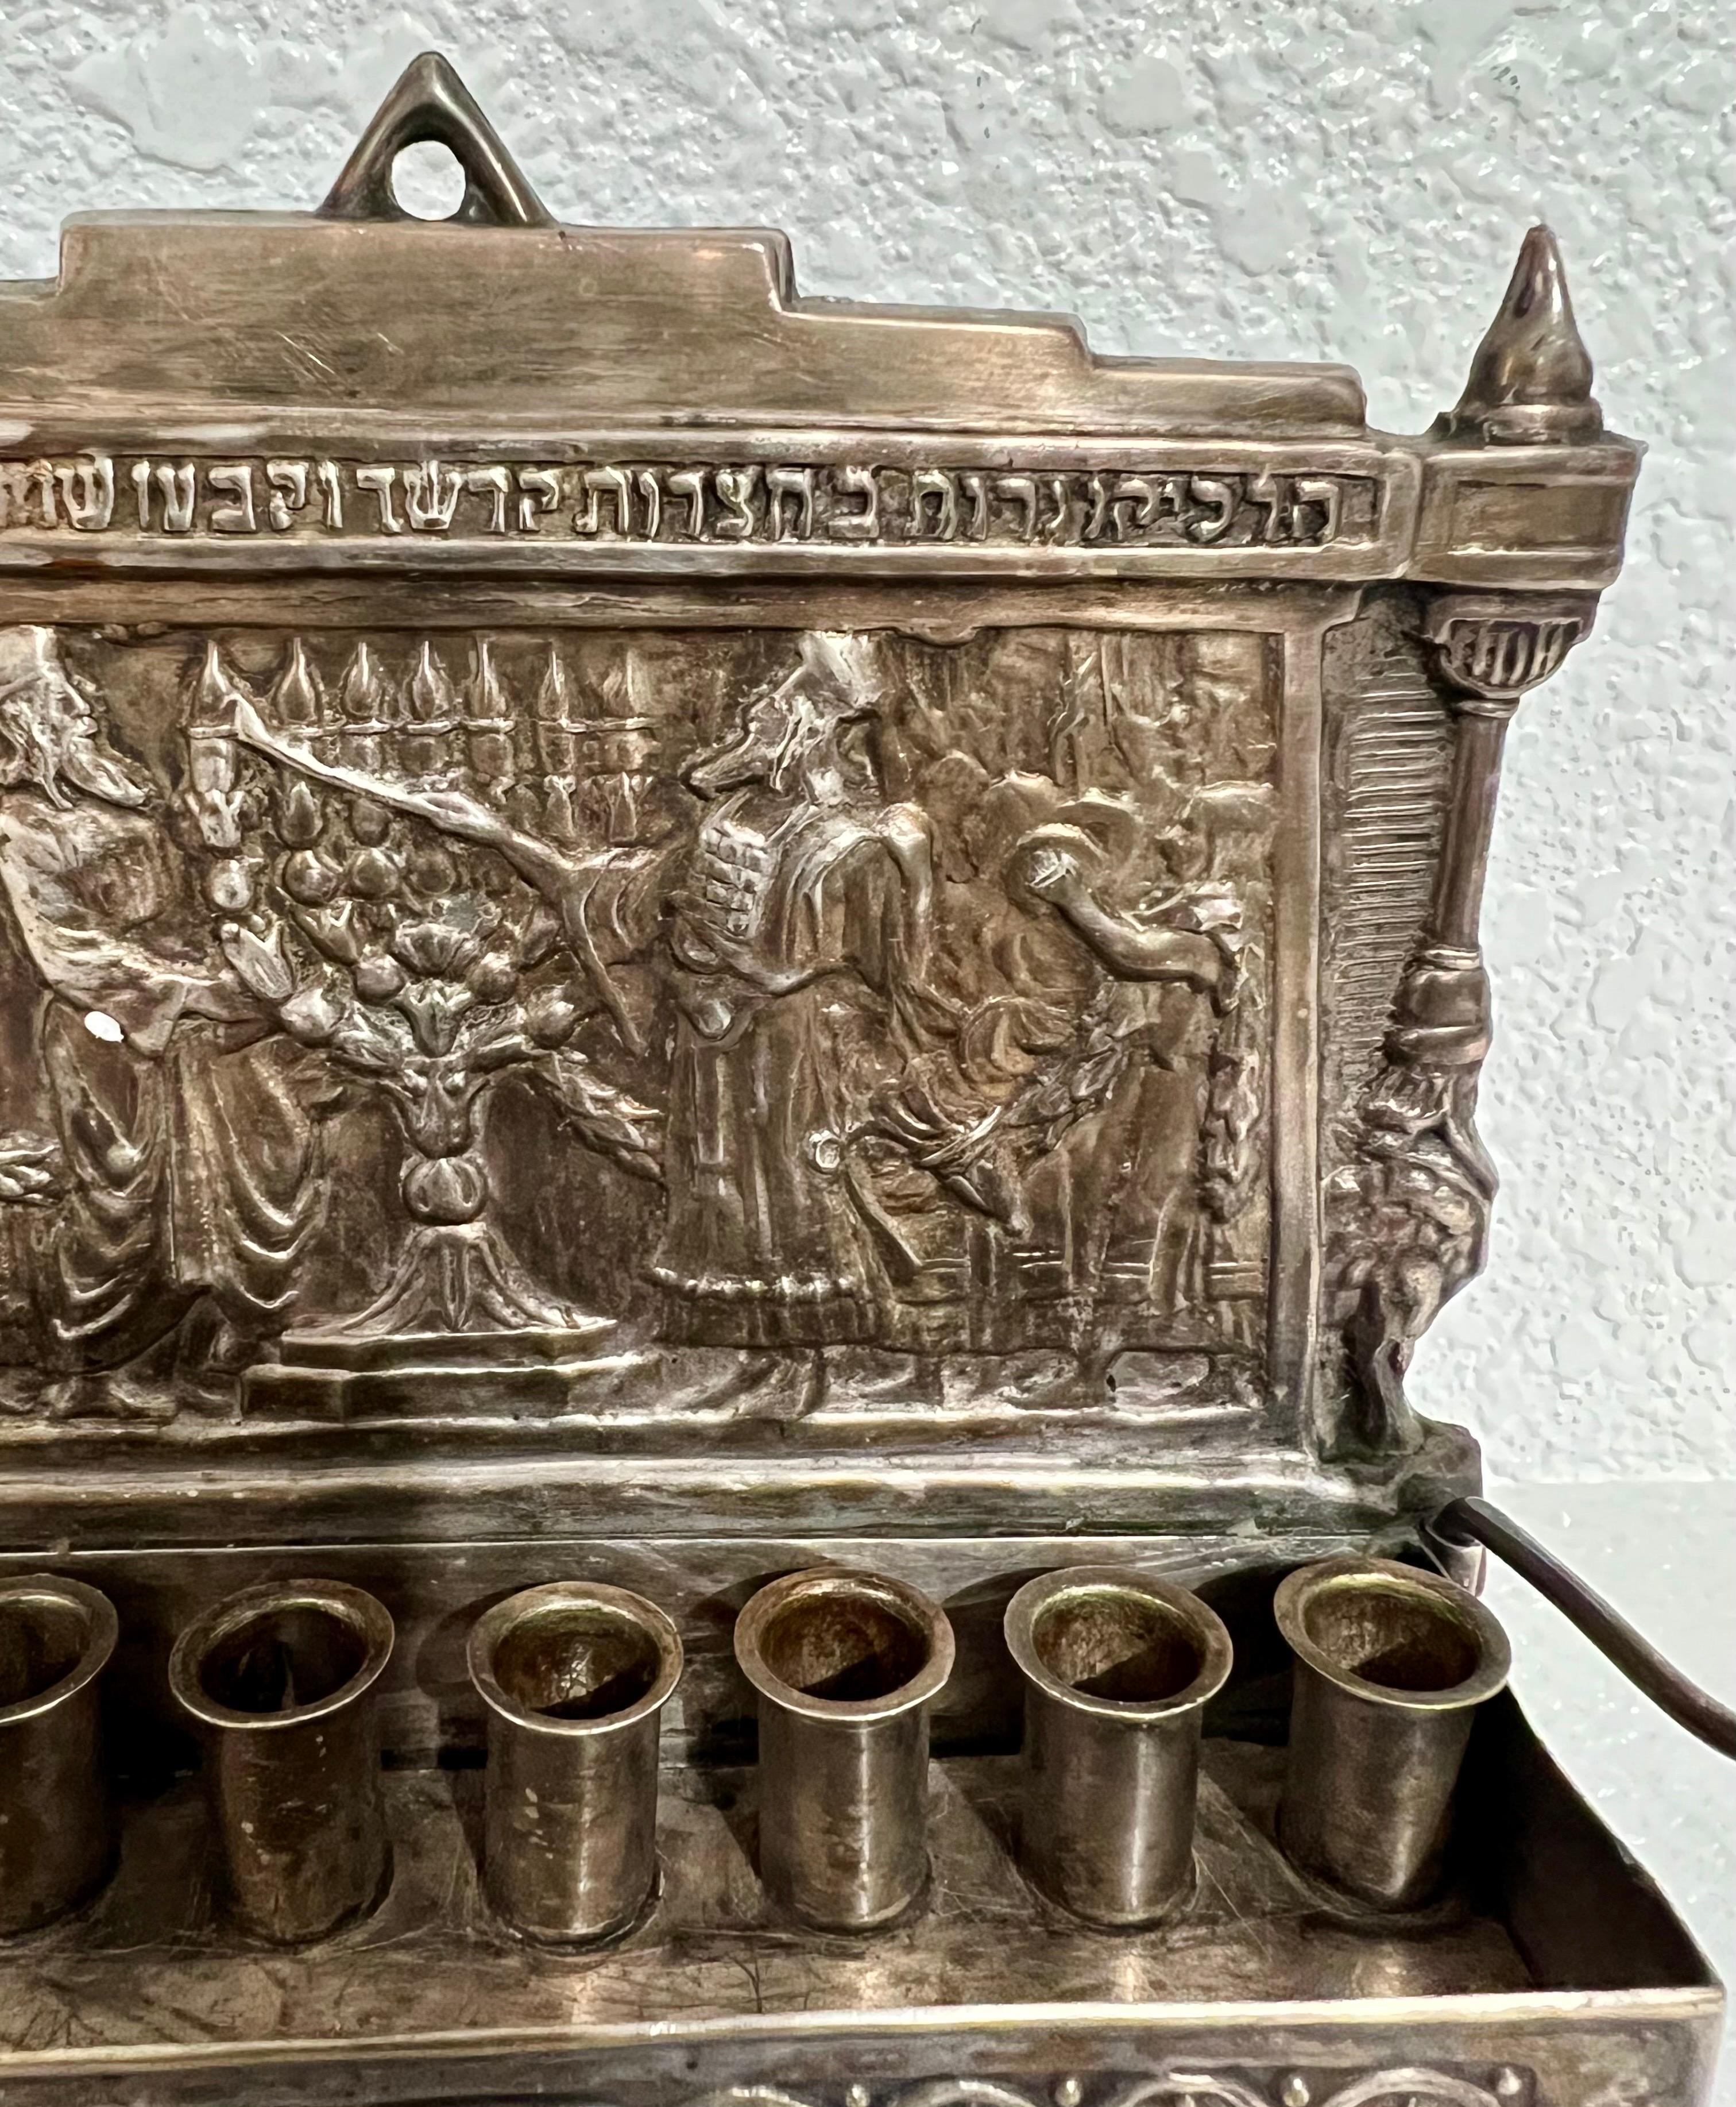 For standing on feet or as a wall hanging with a hole at the top for mounting on the wall. Original Bezalel School brass bronze menorah with the original silverplate intact. Including the servant light Shammash (which is more rare) and having all 8